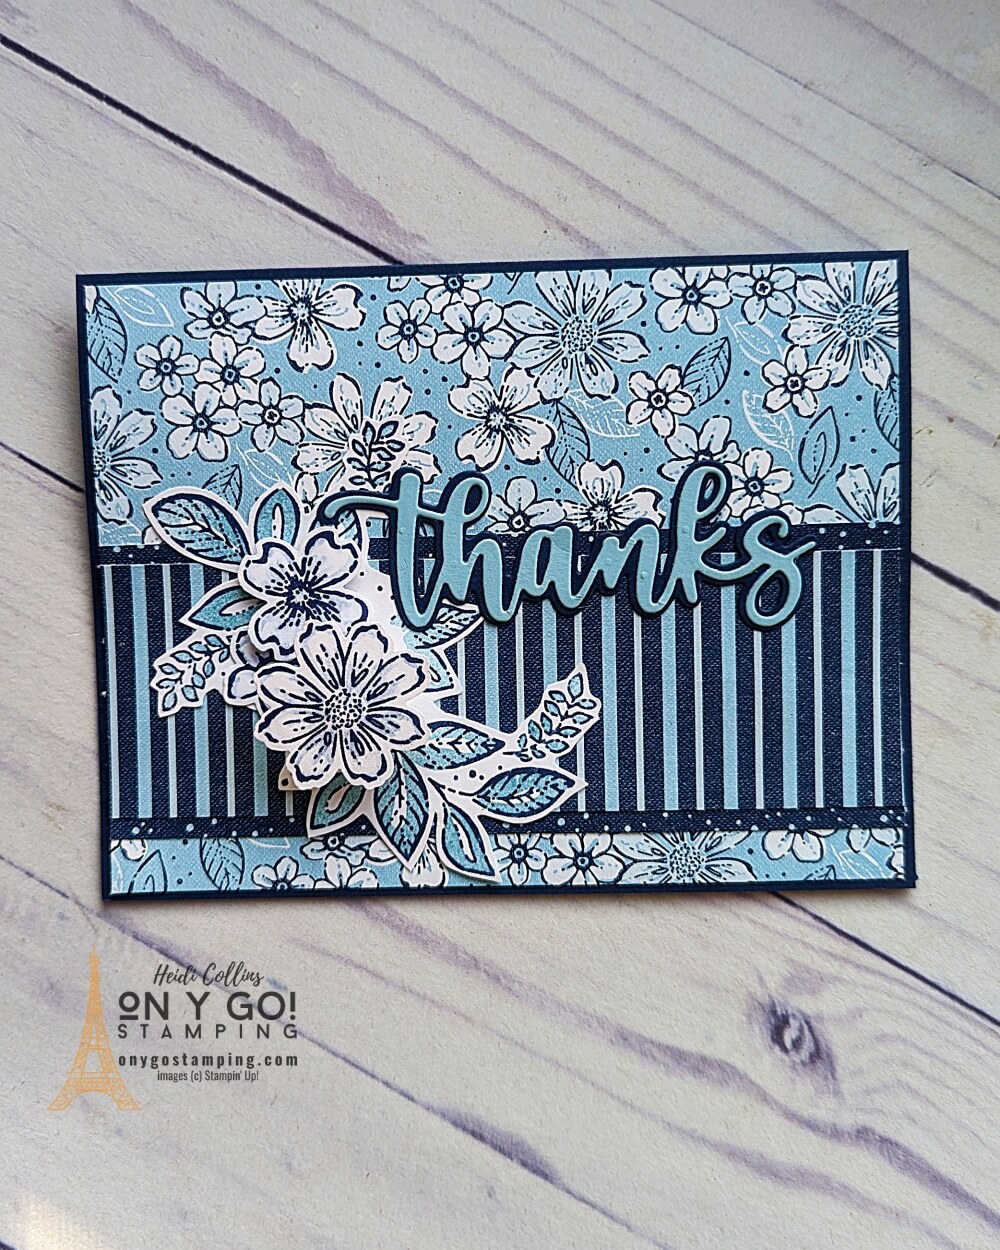 Add an extra special touch to your thank you cards with the Petal Park stamp set, Stampin' Up!® Regency Park DSP! This beautiful set of stamps, designer series paper, and paper accessories is sure to make any thoughtful gesture all the more delightful. Whether you're making thank you cards for a special occasion or just for fun, the combination of this gorgeous and vibrant set is sure to bring joy.